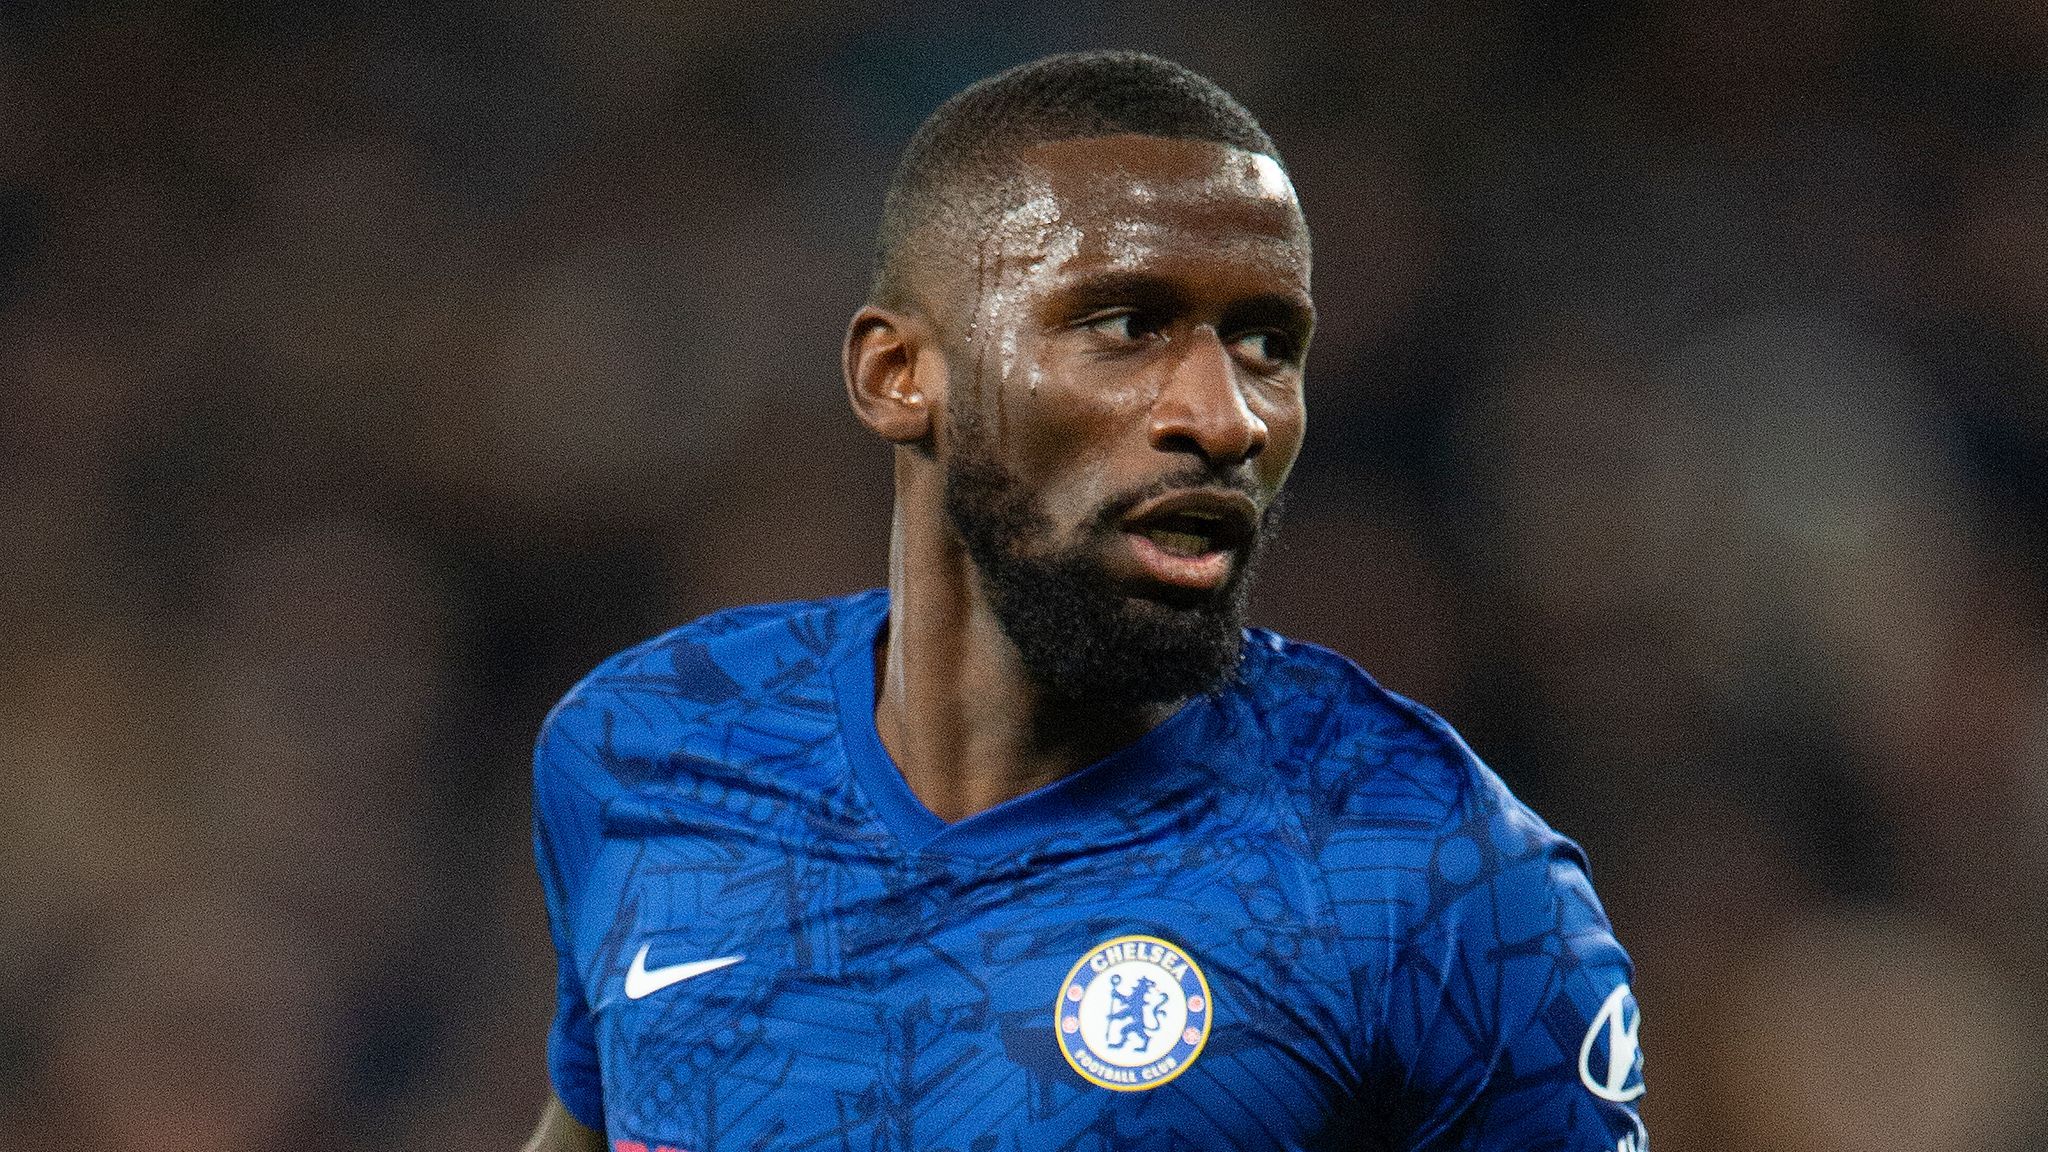 Antonio Rudiger alleged racist abuse investigation ended